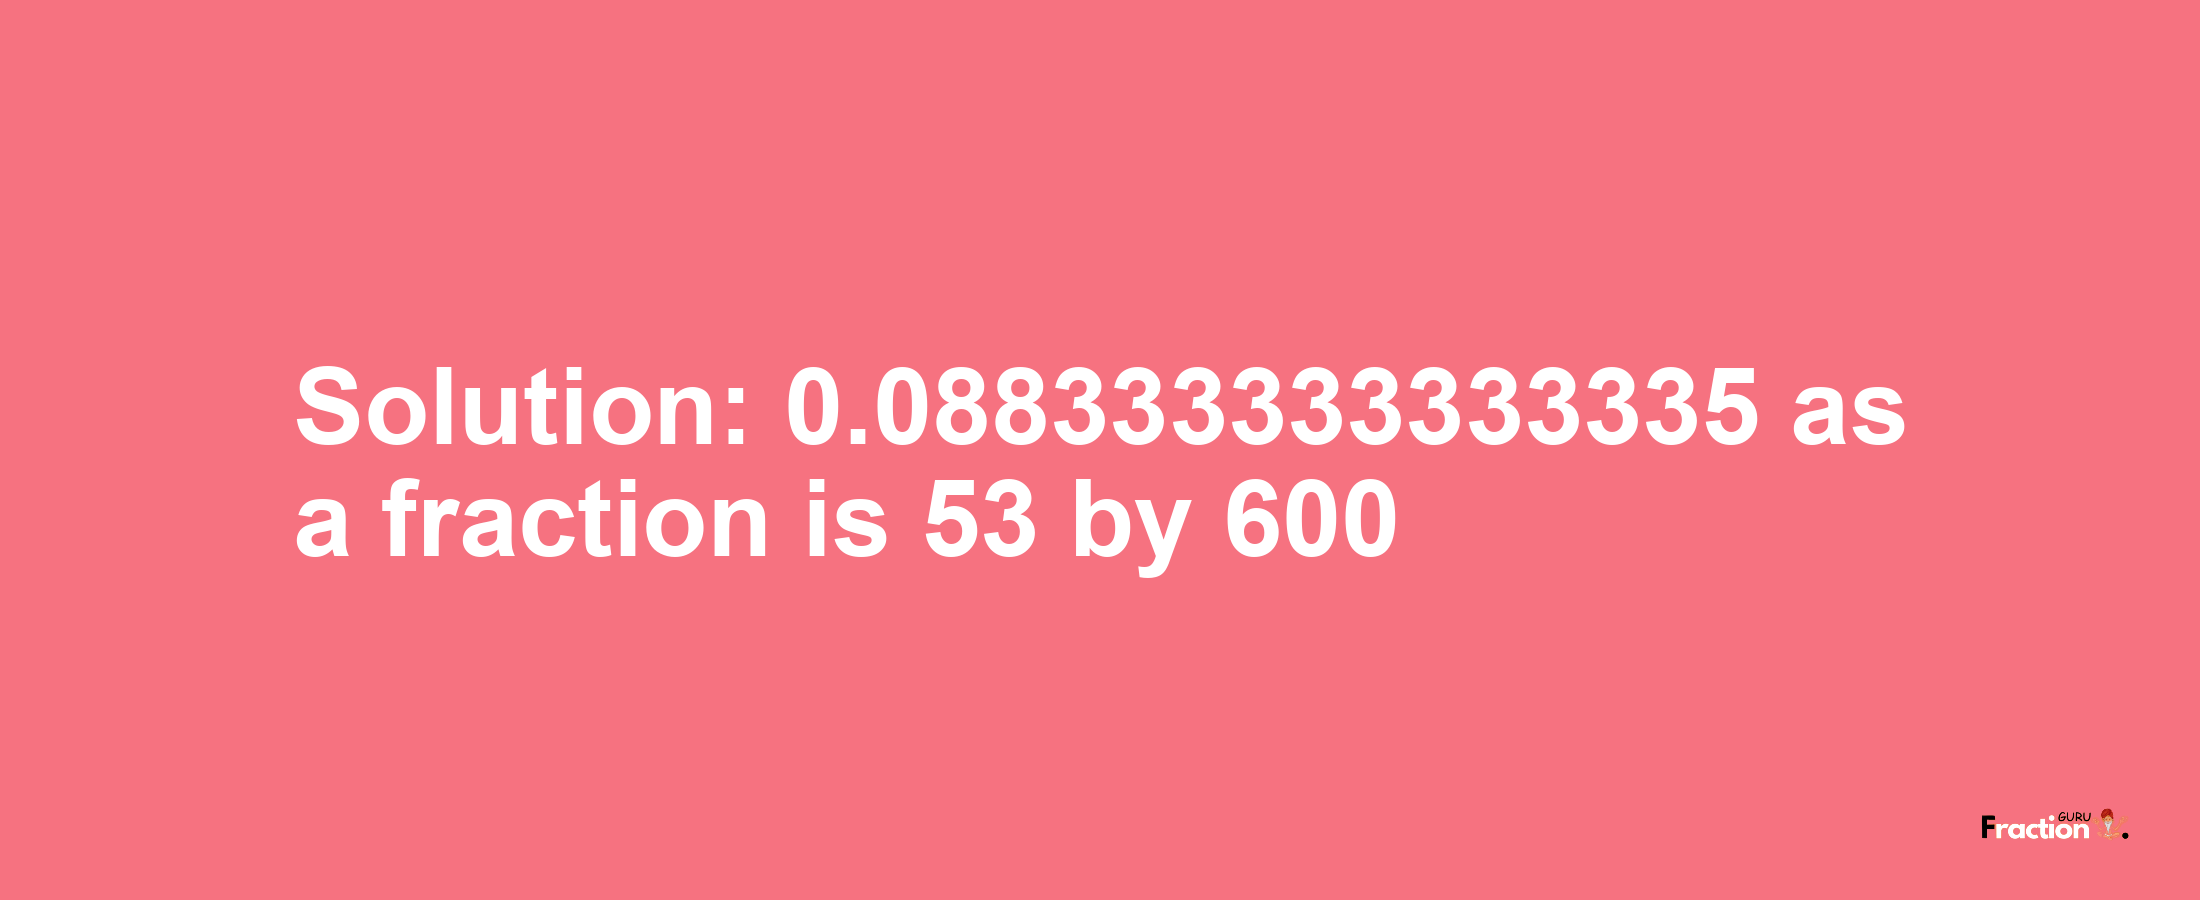 Solution:0.088333333333335 as a fraction is 53/600